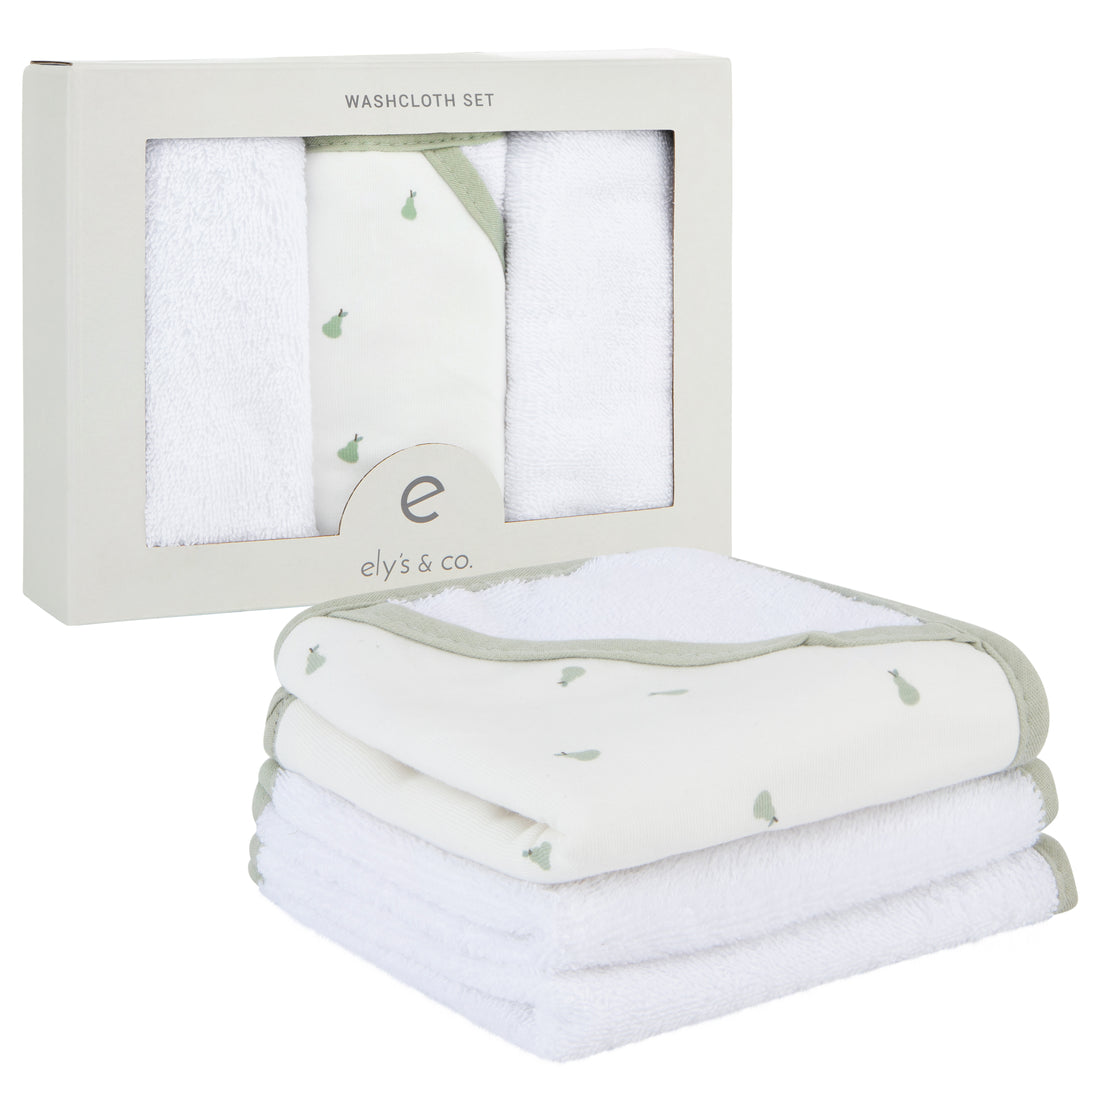 Ely's & Co. Pear Hooded Towel and Washcloth Set - 3 Pack Washcloths